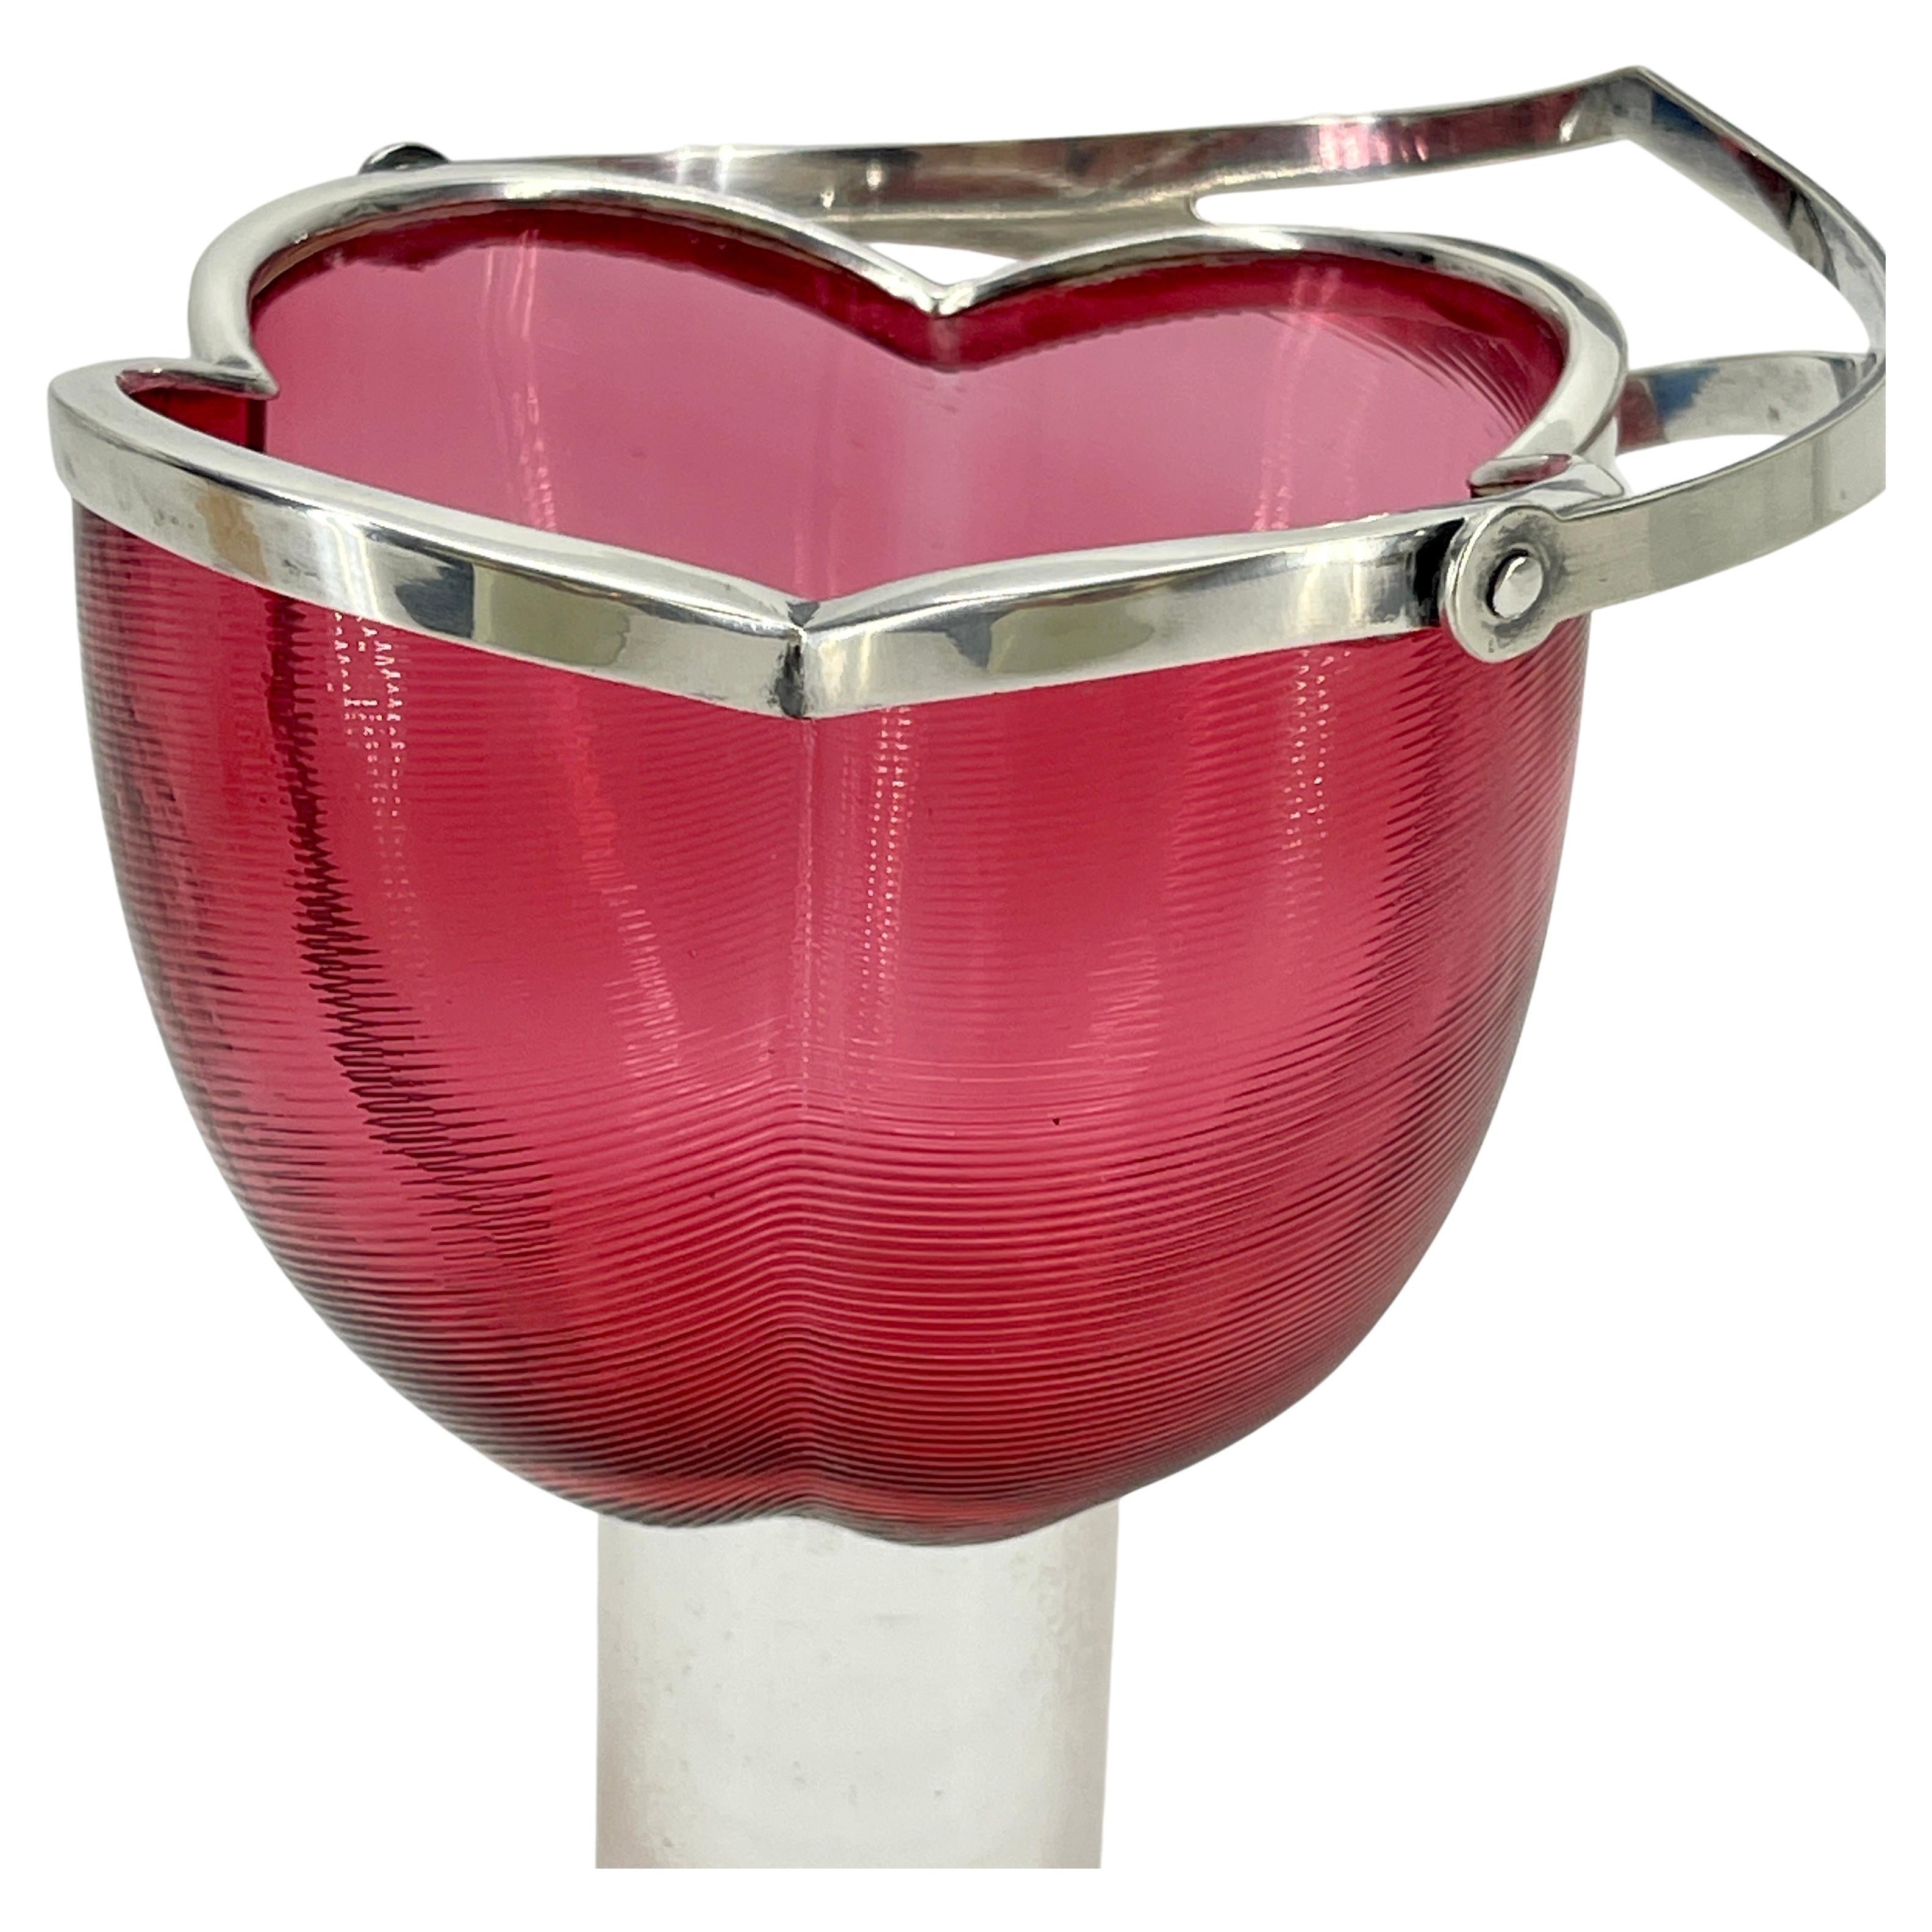 Italian Bonbonniere in Red Art Glass Bowl with English Silver Mounting